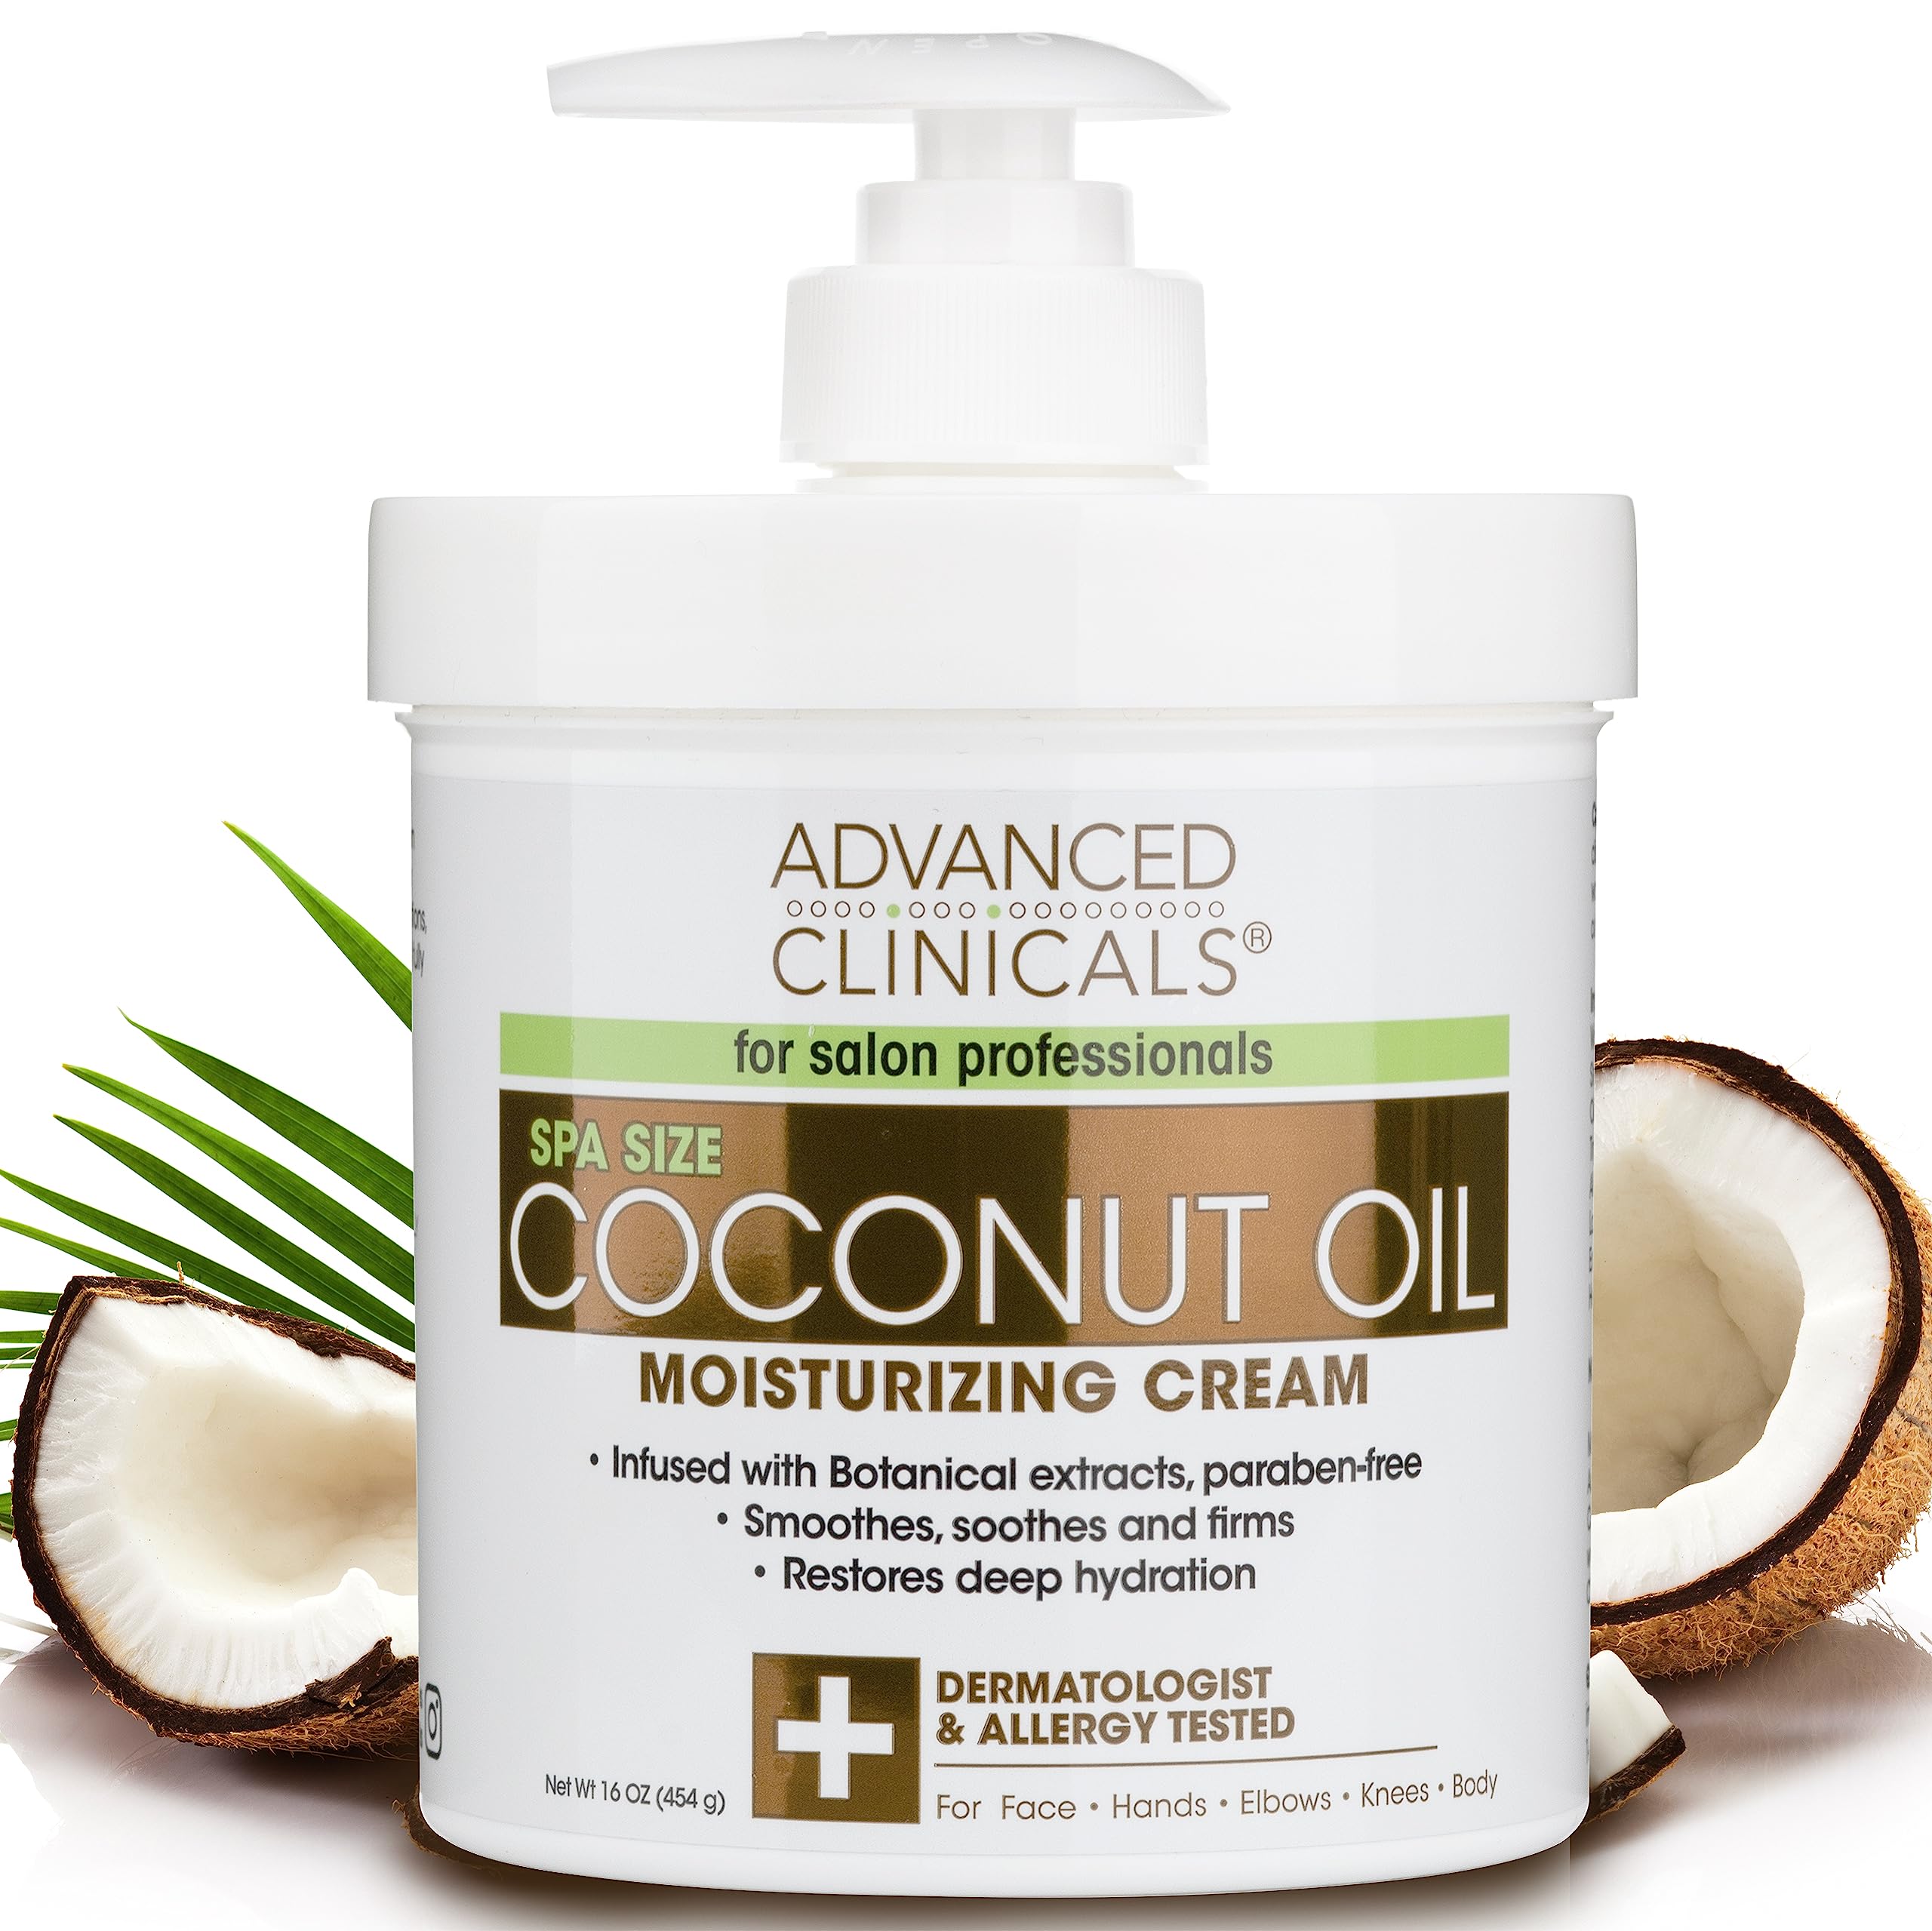 Advanced Clinicals Coconut Body Lotion Moisturizing Cream & Face Lotion | Coconut Oil Lotion For Women & Men | Natural Coconut Cream Moisturizer Body Butter Skin Care Balm For Dry Skin, Large 16 Oz